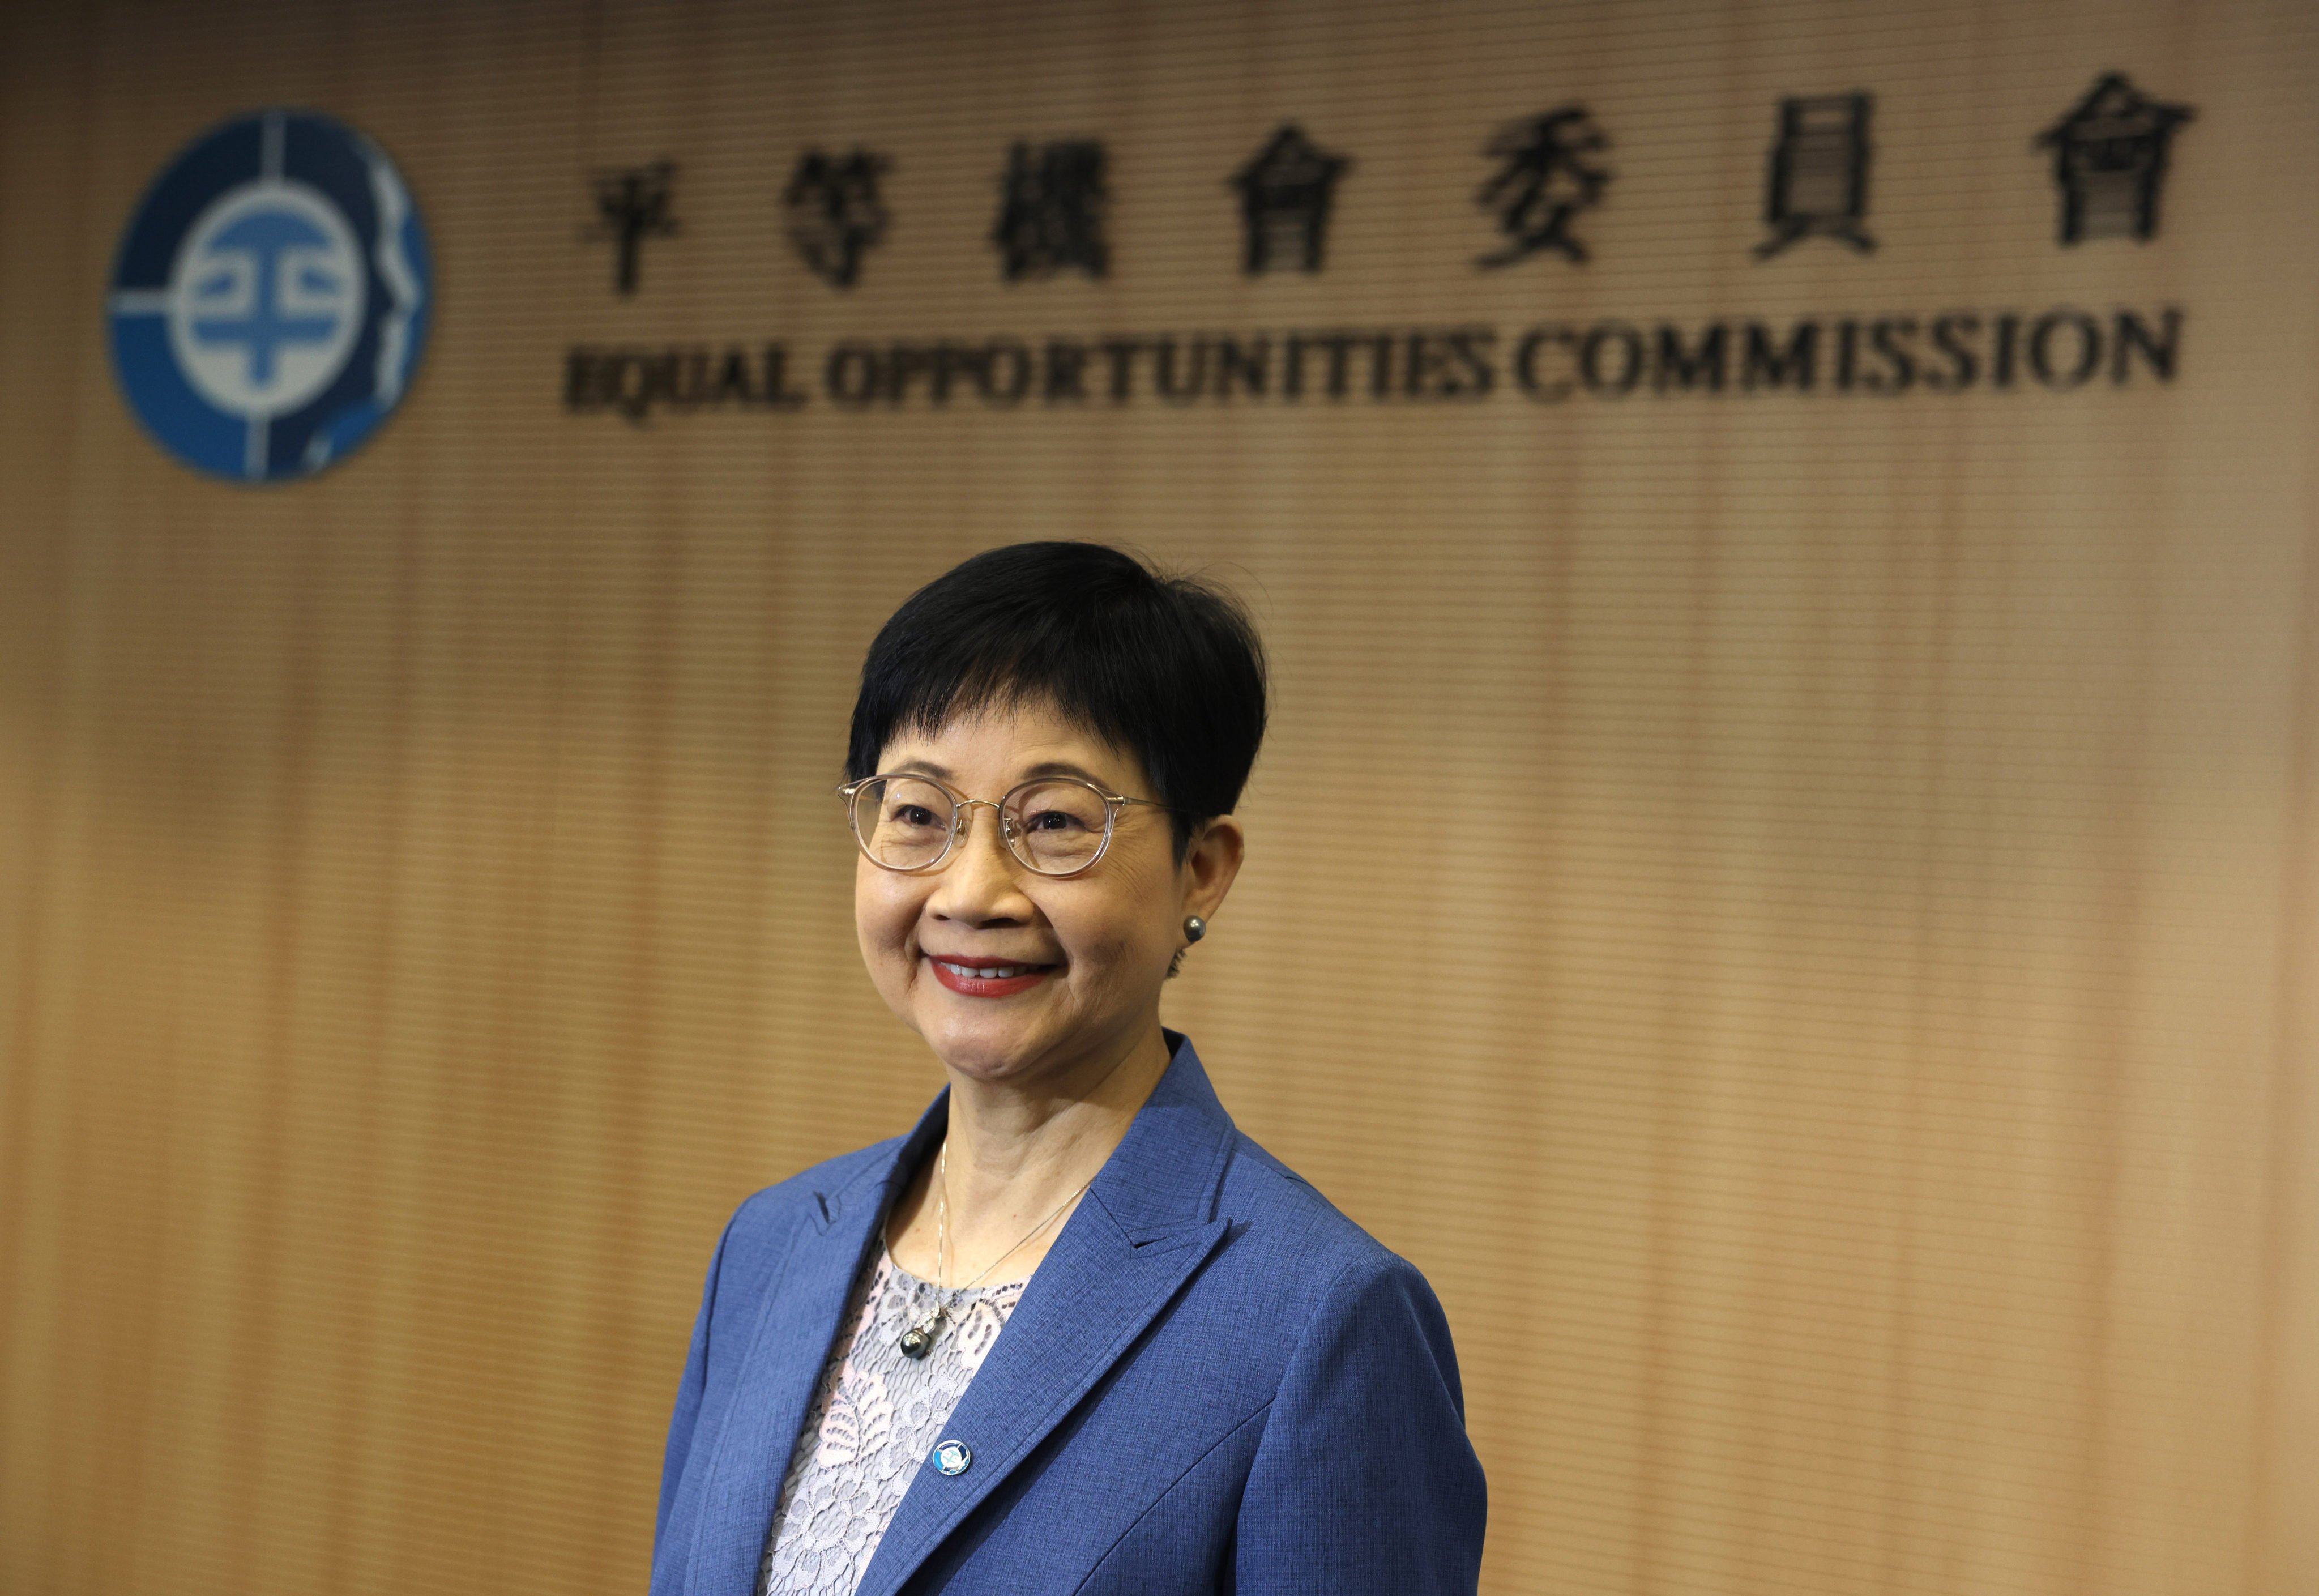 Linda Lam, the new chairwoman of the Equal Opportunities Commission. Photo: Yik Yeung-man